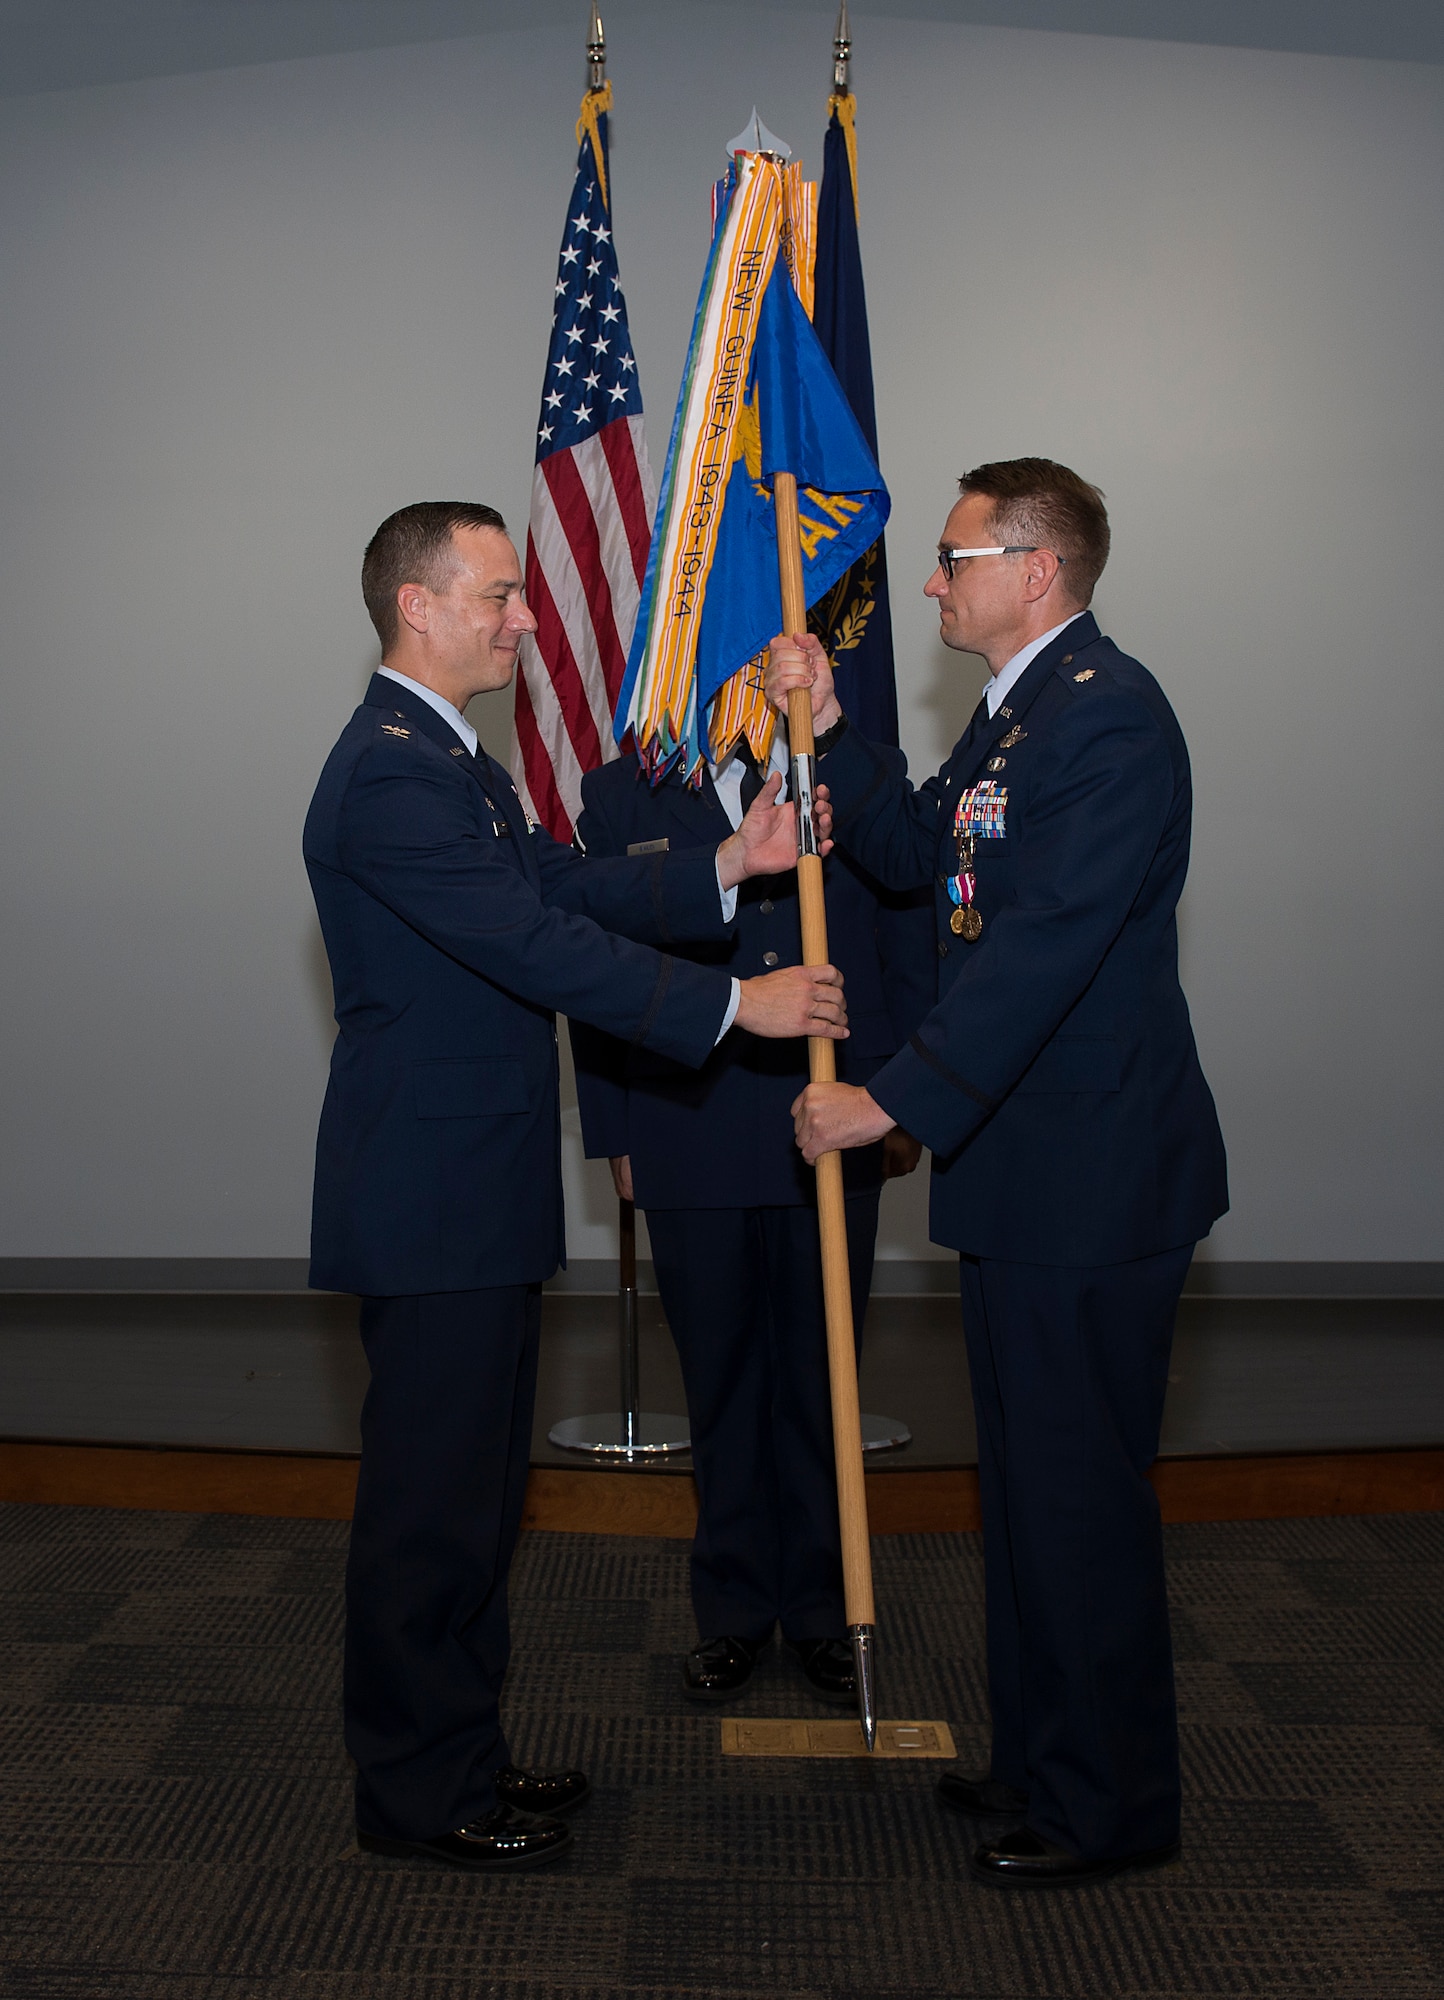 Lt. Col. Joshua J. Zaker, commander of the 64th Air Refueling Squadron, passes the 64th ARS guidon to Col. Robert L. Hanovich JR, commander of the 22nd Operations group at McConnell Air Force Base, Kan. during a ceremony on July 6, 2018 at Pease Air National Guard Base, N.H. Zaker relinquished command of the 64th ARS after more than three years as the commander. (N.H. Air National Guard photo by Staff Sgt. Kayla White)